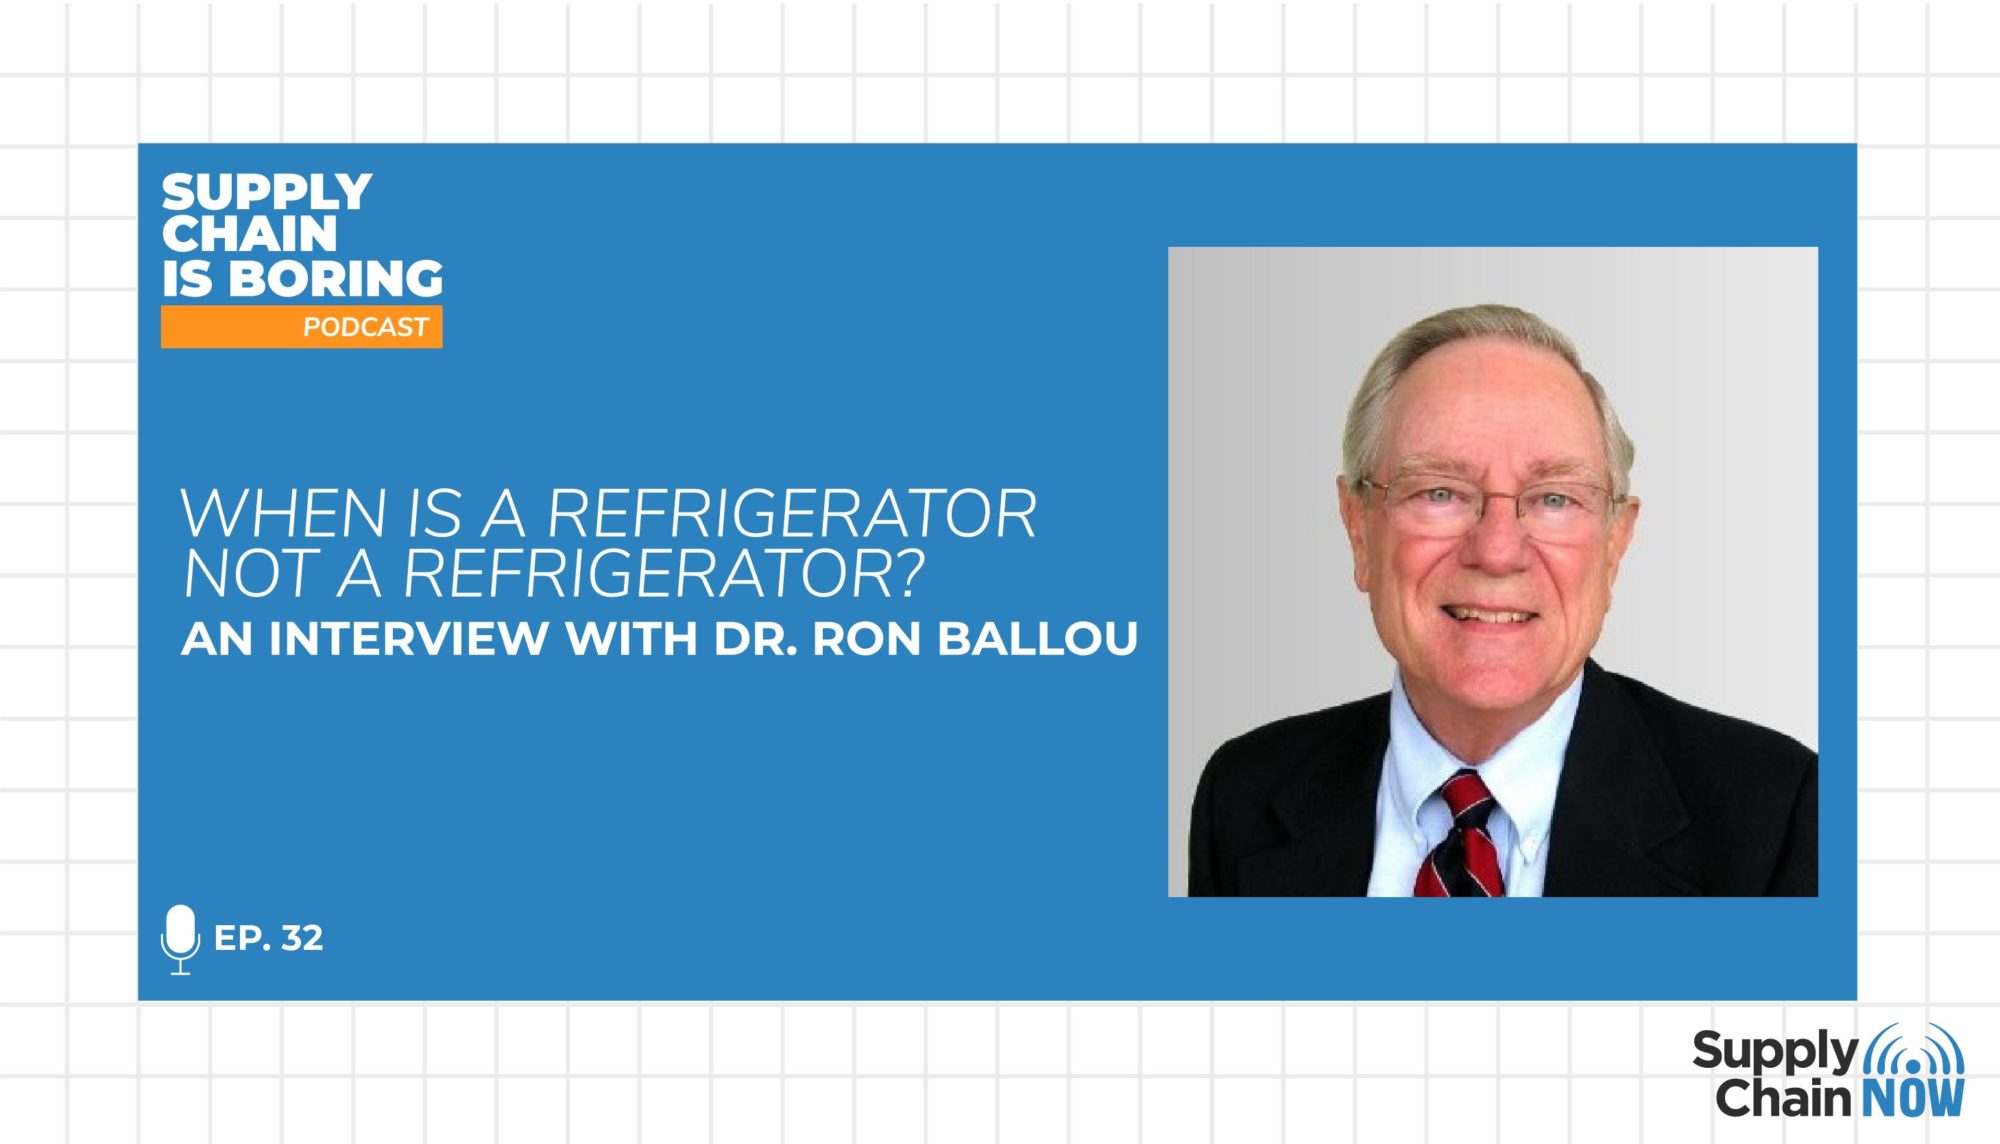 When is a refrigerator not a refrigerator? An Interview with Dr. Ron Ballou